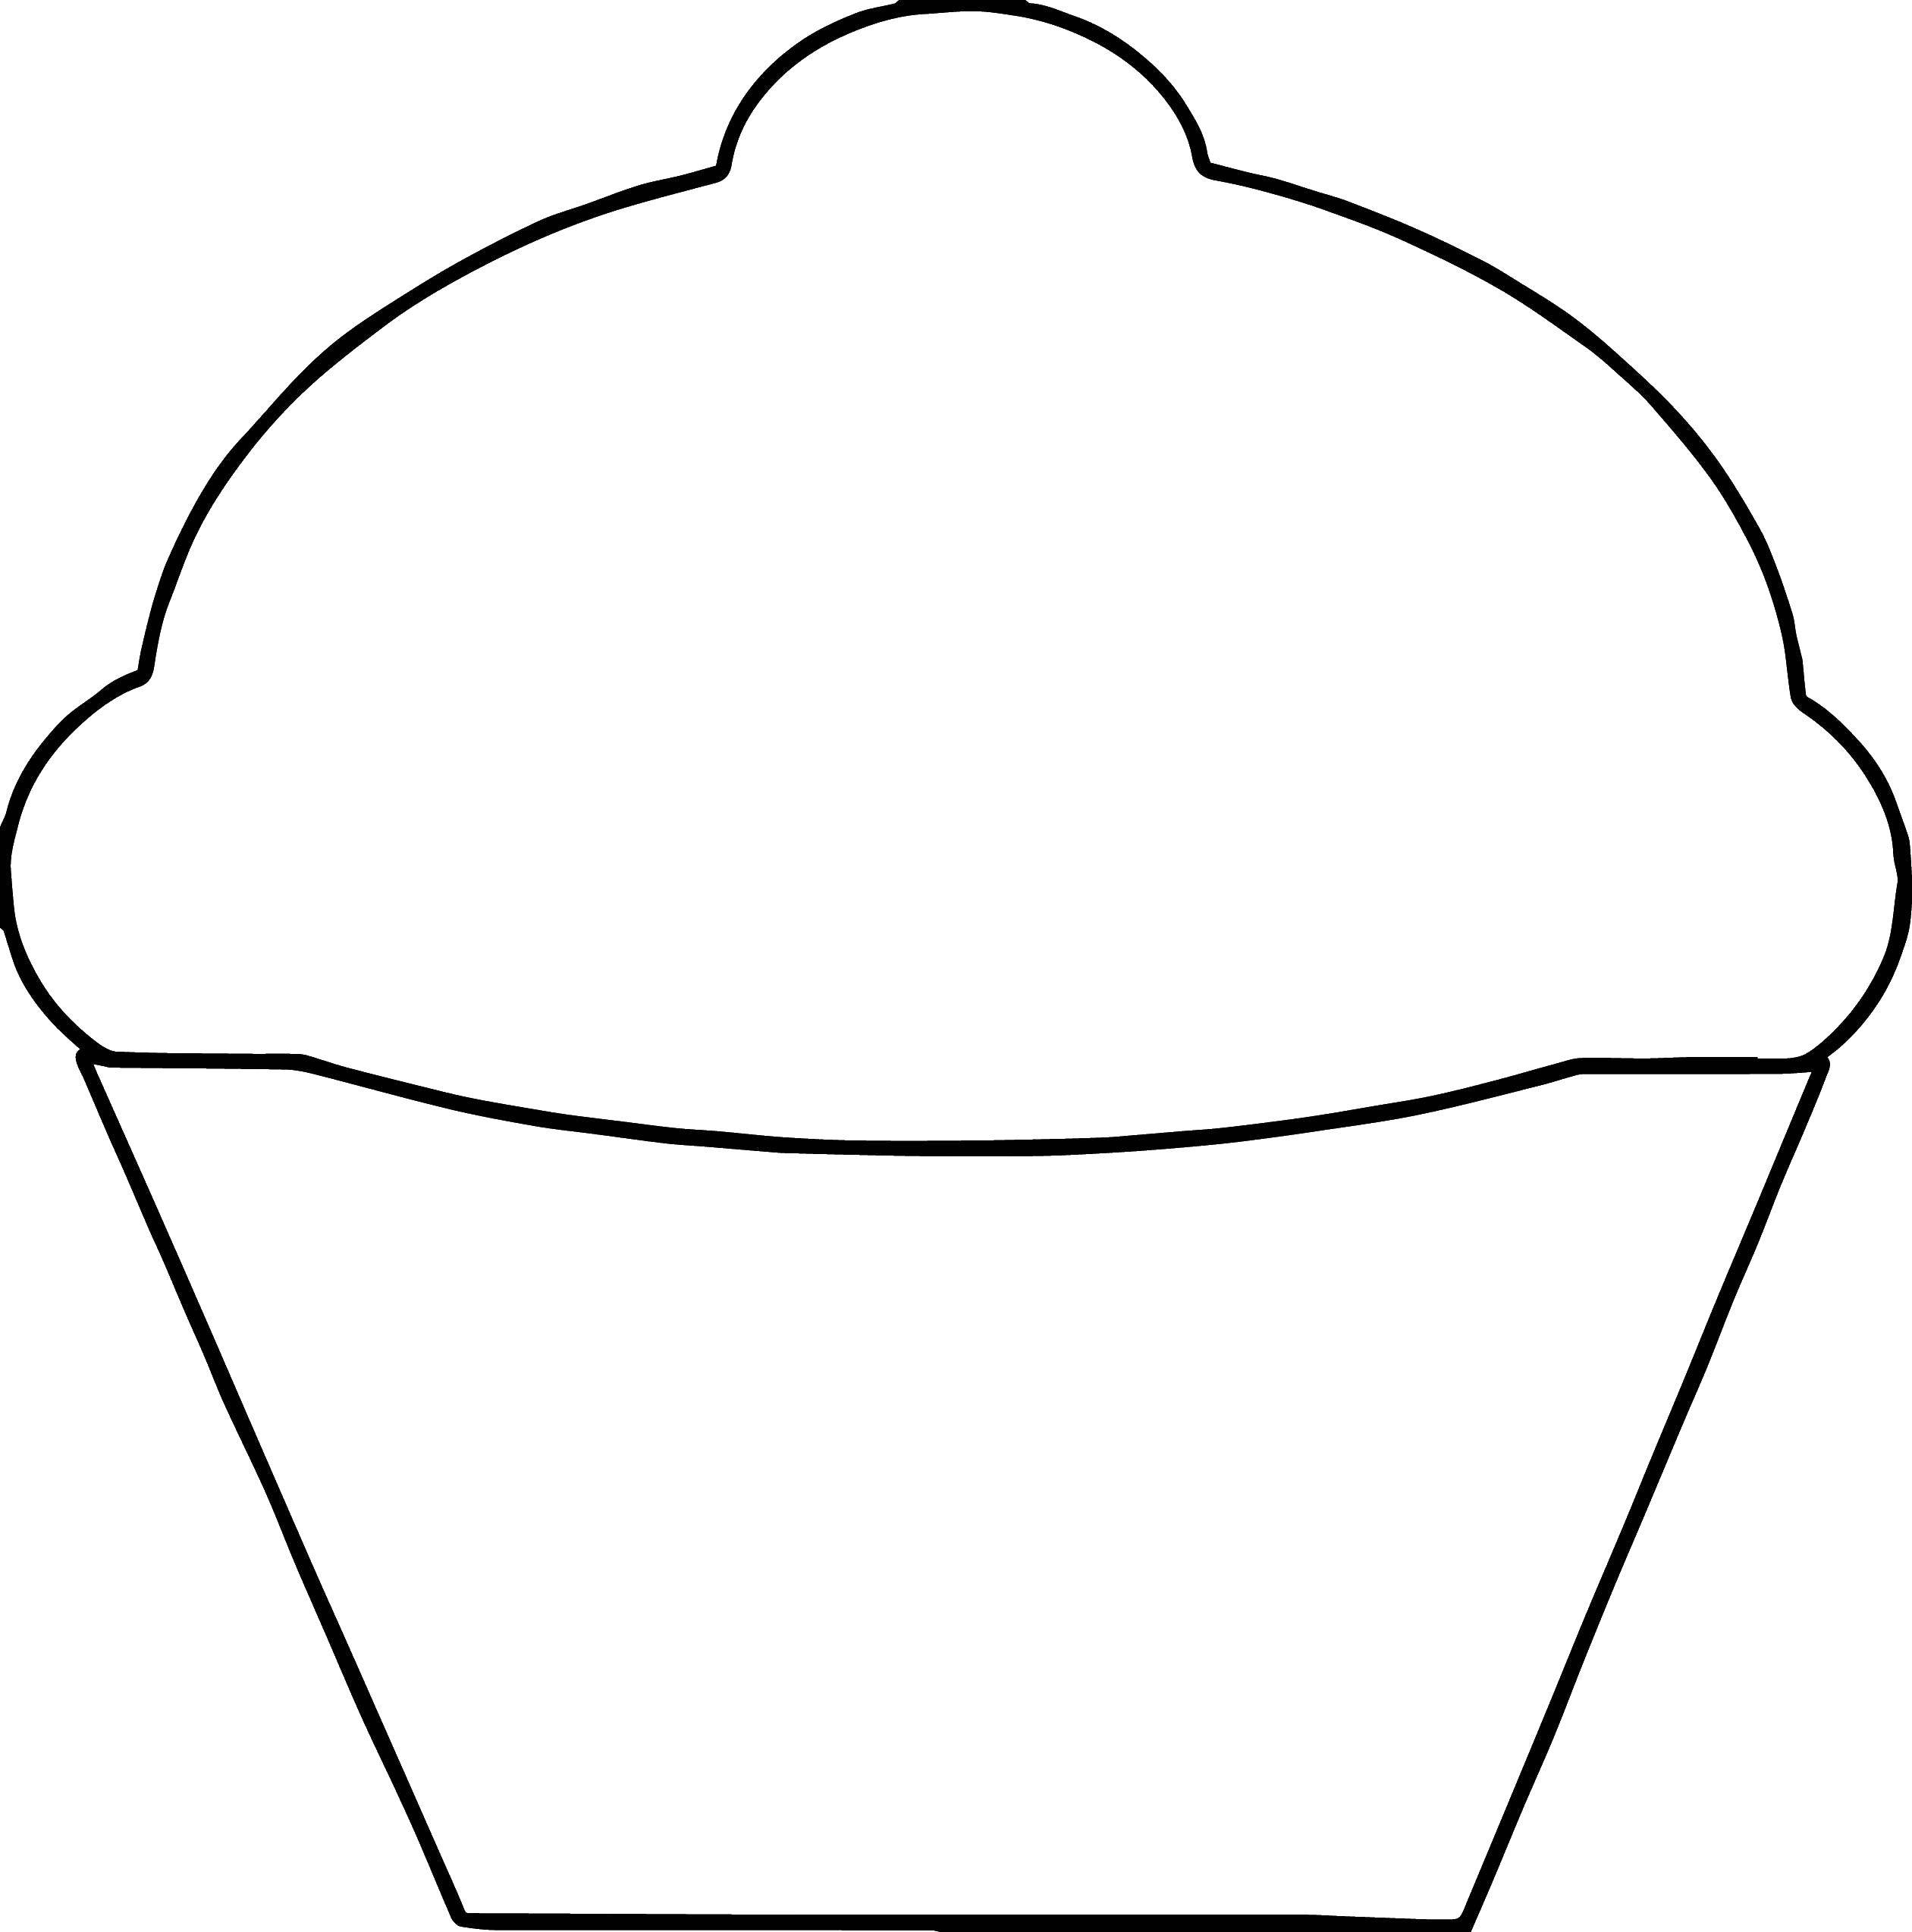 Coloring The outline of the cupcake. Category coloring. Tags:  Outline .